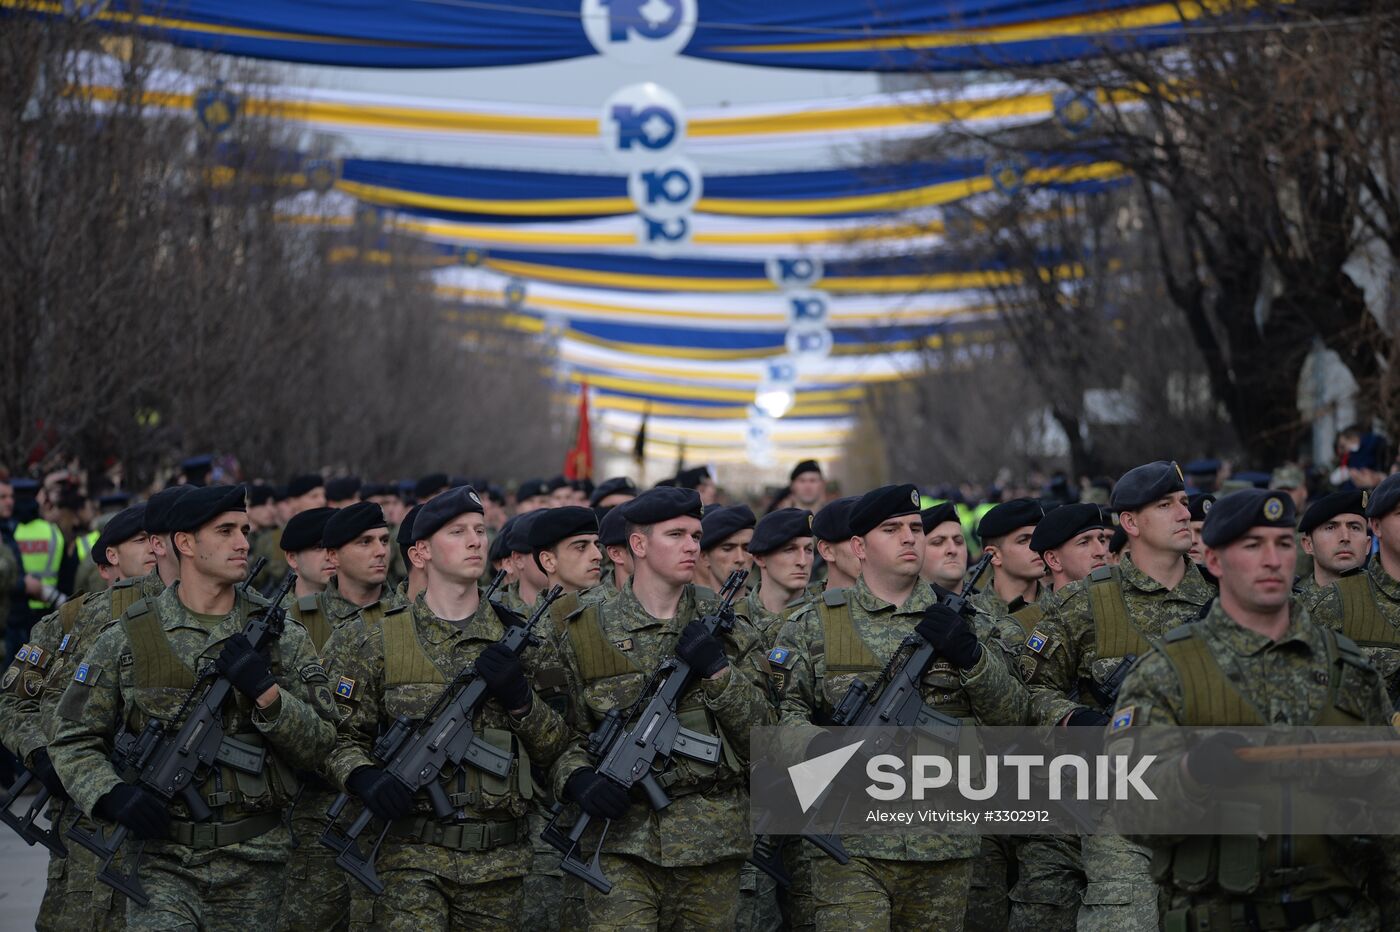 Celebrations of 10th anniversary of Kosovo independence